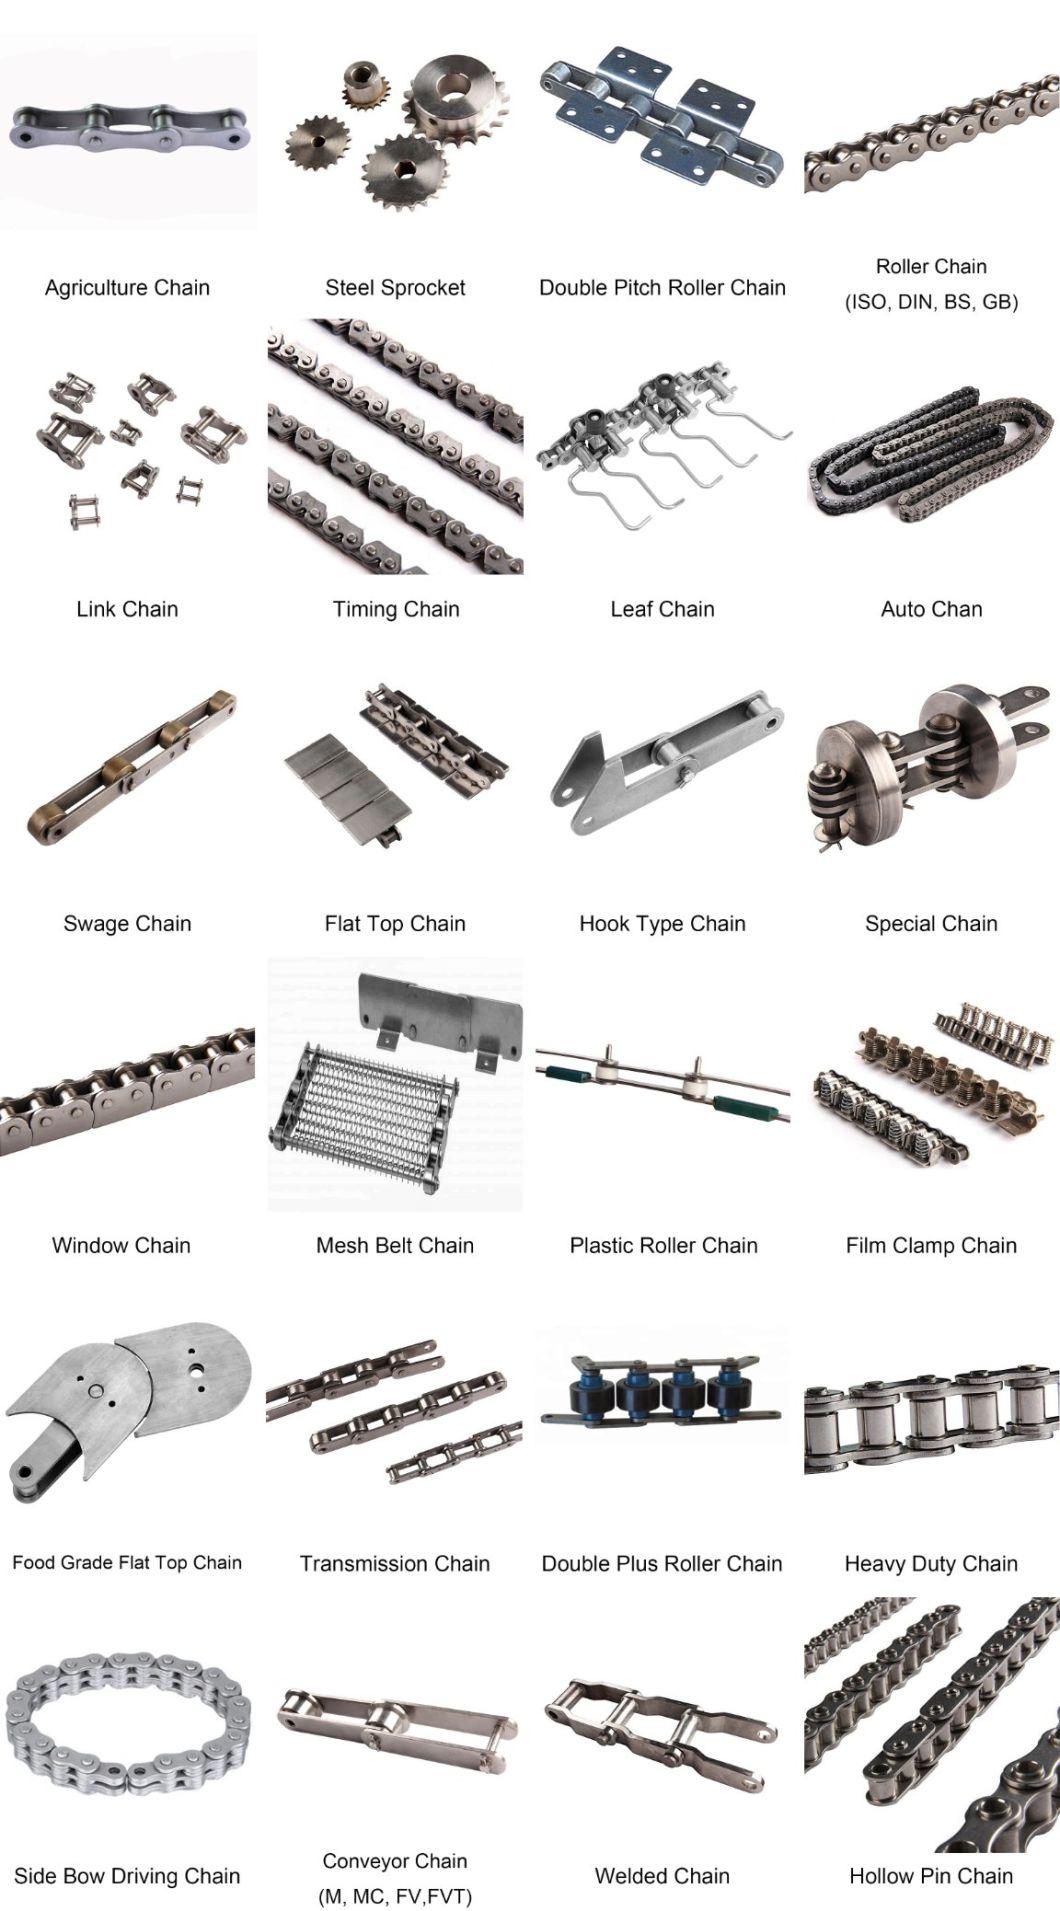 ISO Certified Conveyor Chain Manufacturer 3939 Series Lumber Conveyor Chains and Attachment